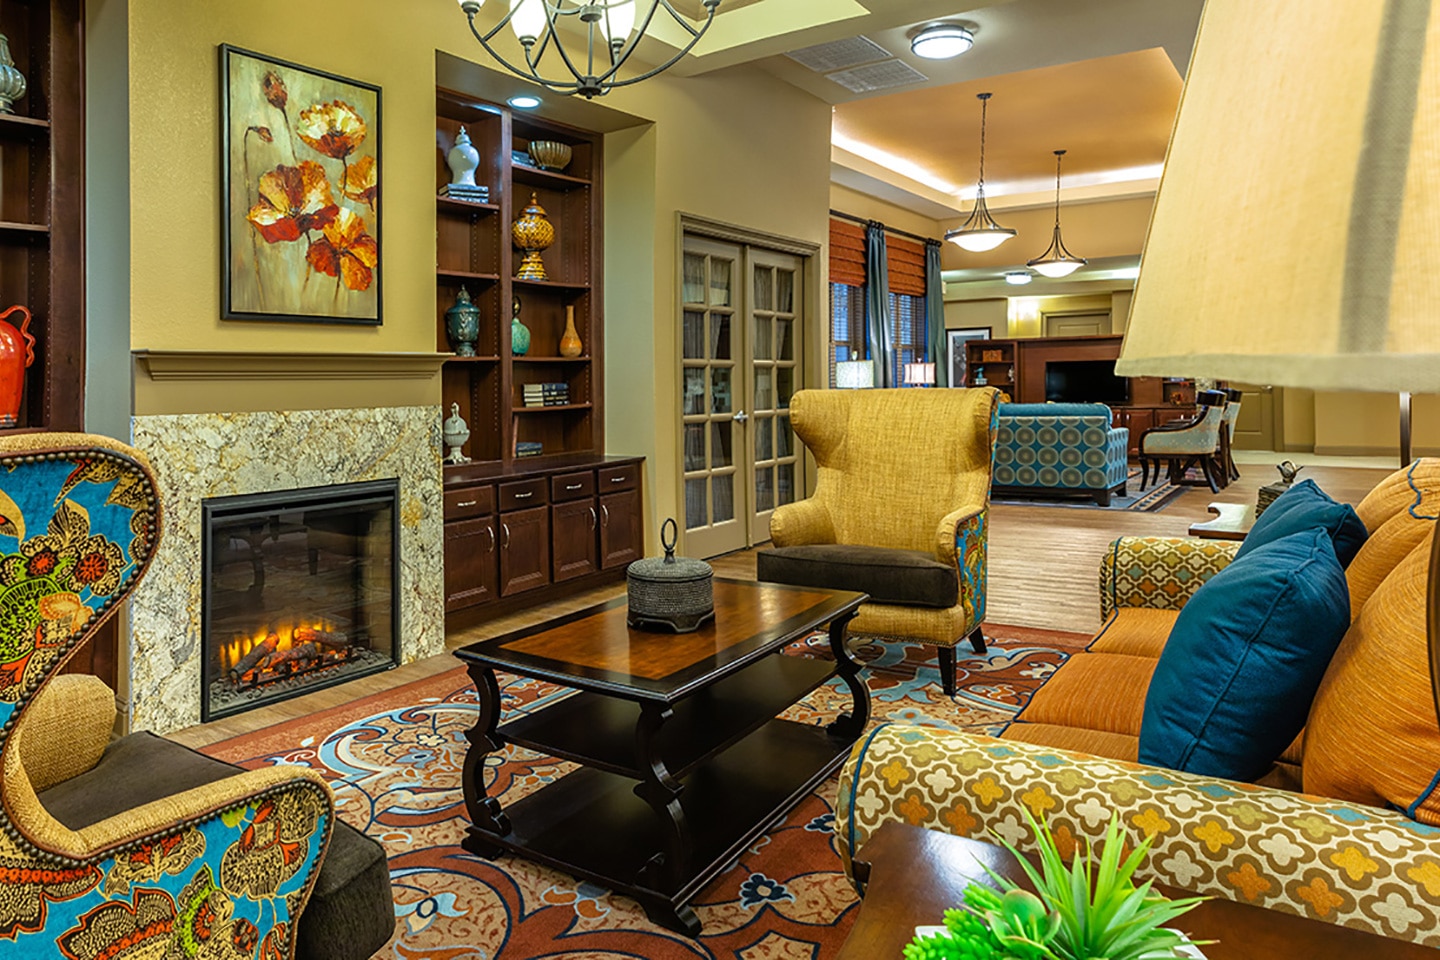 Sonoma House's well-appointed living area with gas fireplace, couches and chairs.